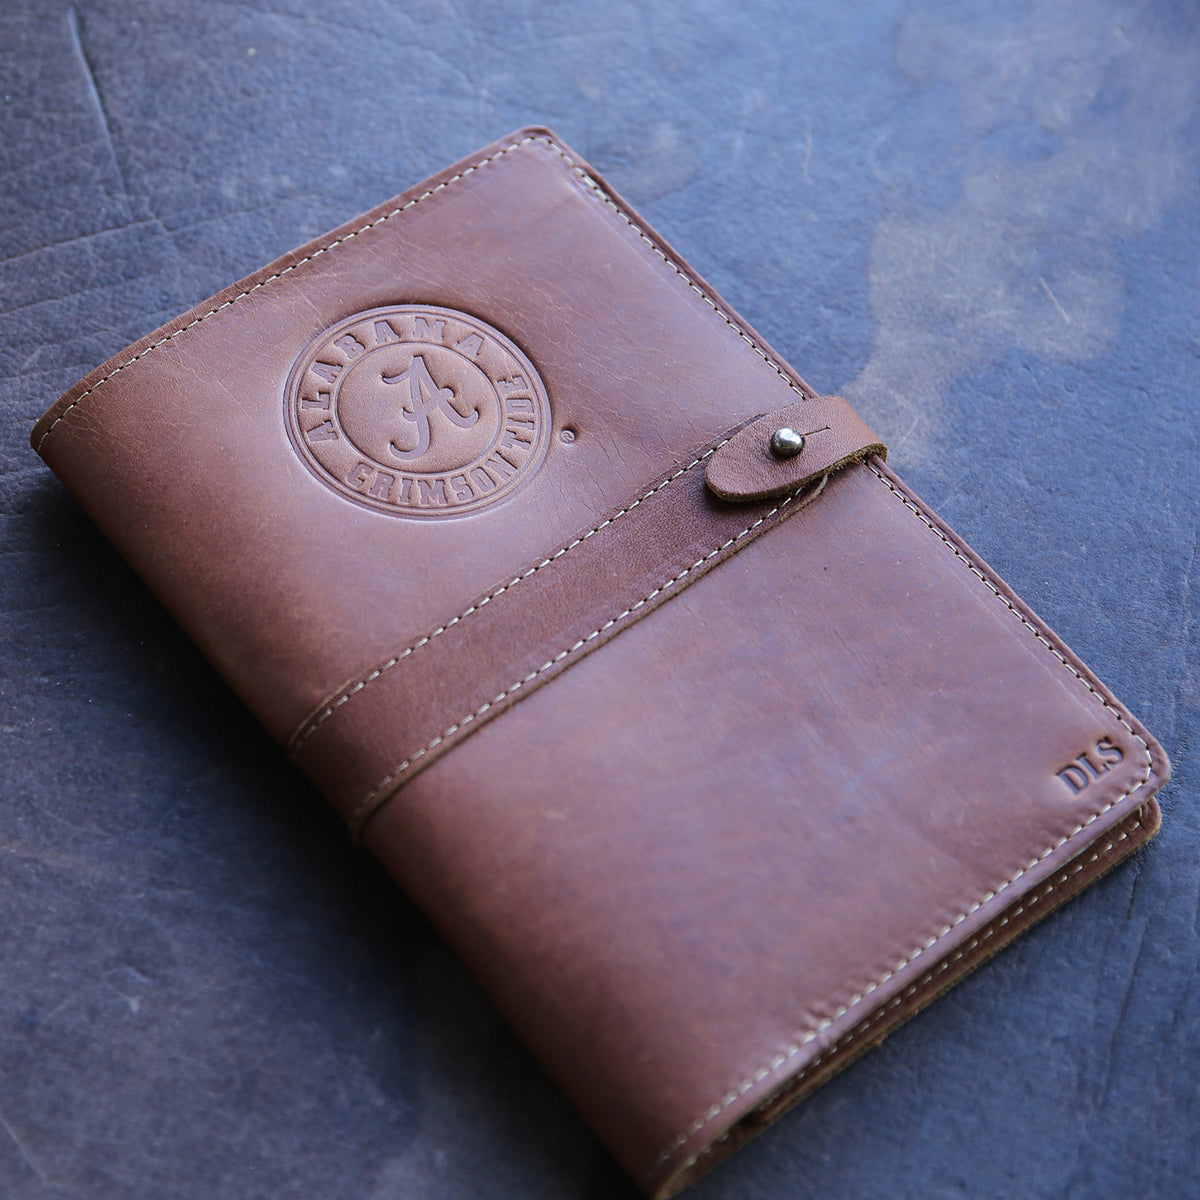 Leather journal with Alabama Crimson Tide logo and personalized initials from Holtz Leather Co in Huntsville, Alabama